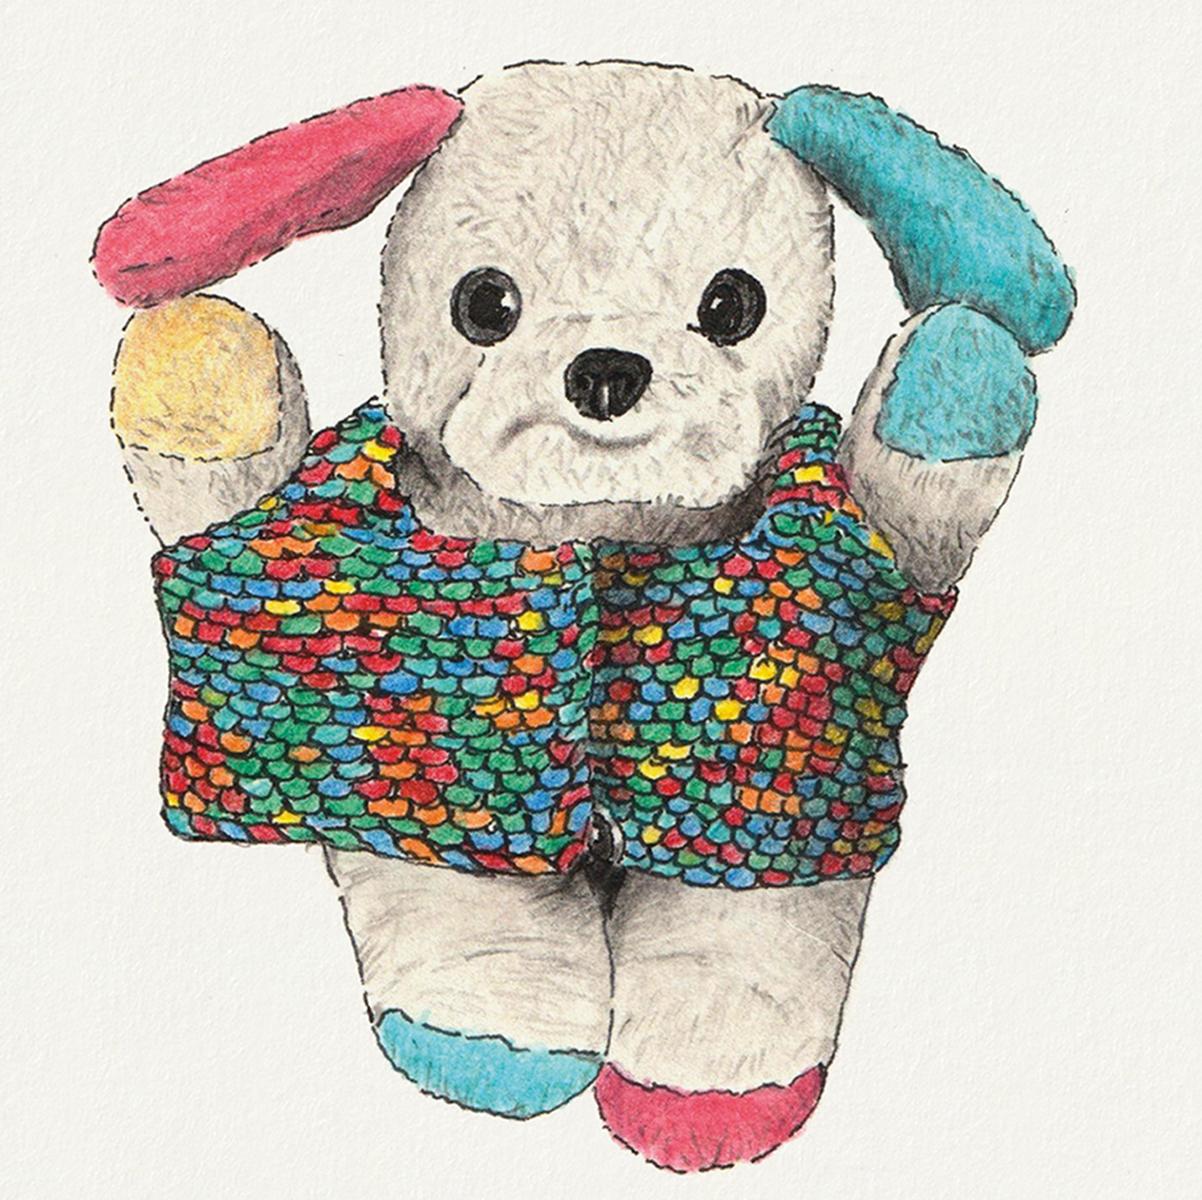 Limited edition print from a pen, ink and coloured pencil drawing of a soft toy in a knitted sweater